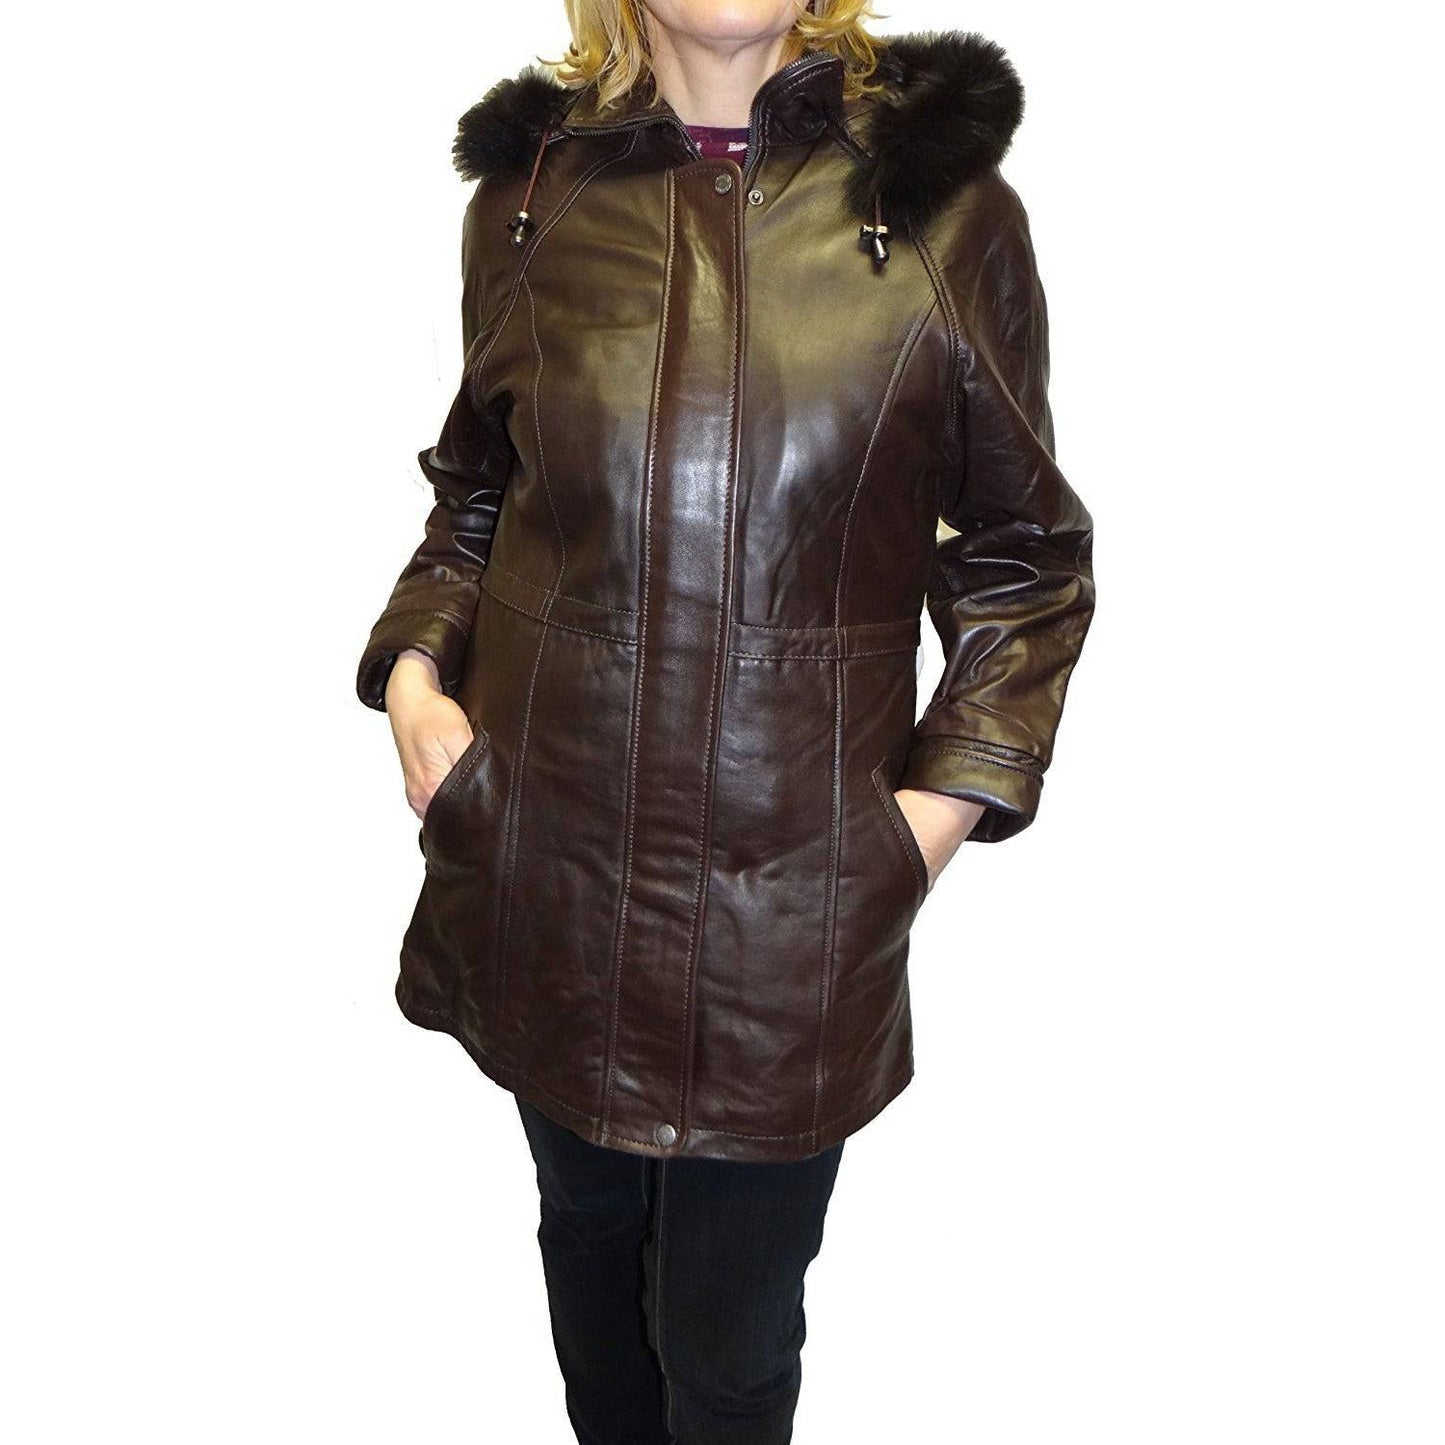 Knoles&Carter Women's Fox Fur Hooded Leather Jacket - Zooloo Leather